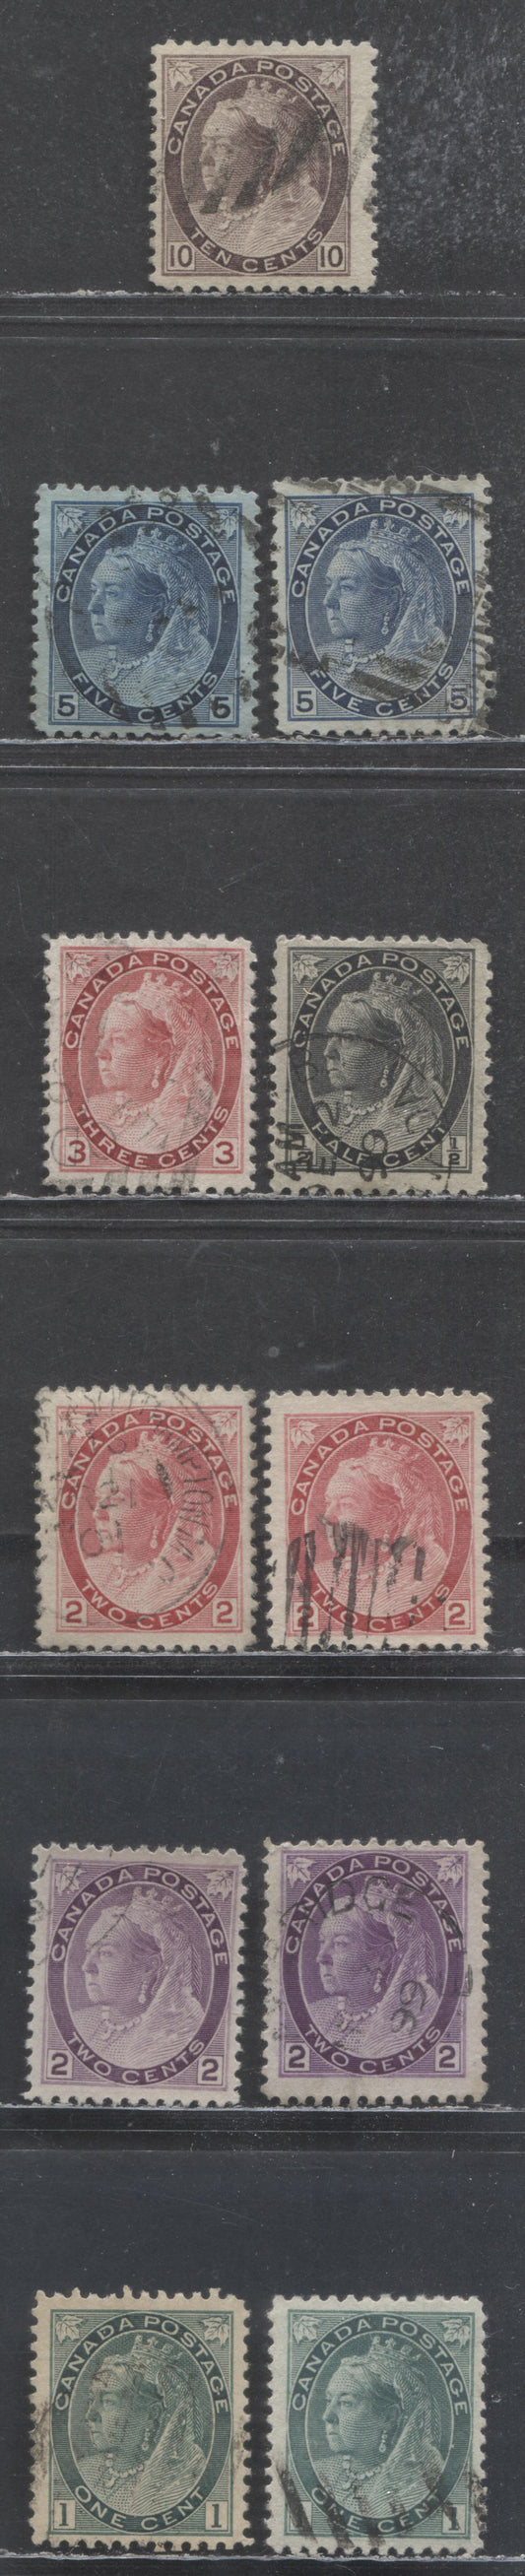 Lot 340 Canada #74, 75, 75i, 76, 76i, 77, 77a, 78, 79, 79b, 83 1/2c - 10c Black - Brown Violet Queen Victoria, 1898-1902  Numeral Issue, 11 Fine & VF Used  Singles Including Shades & Die 2 2c